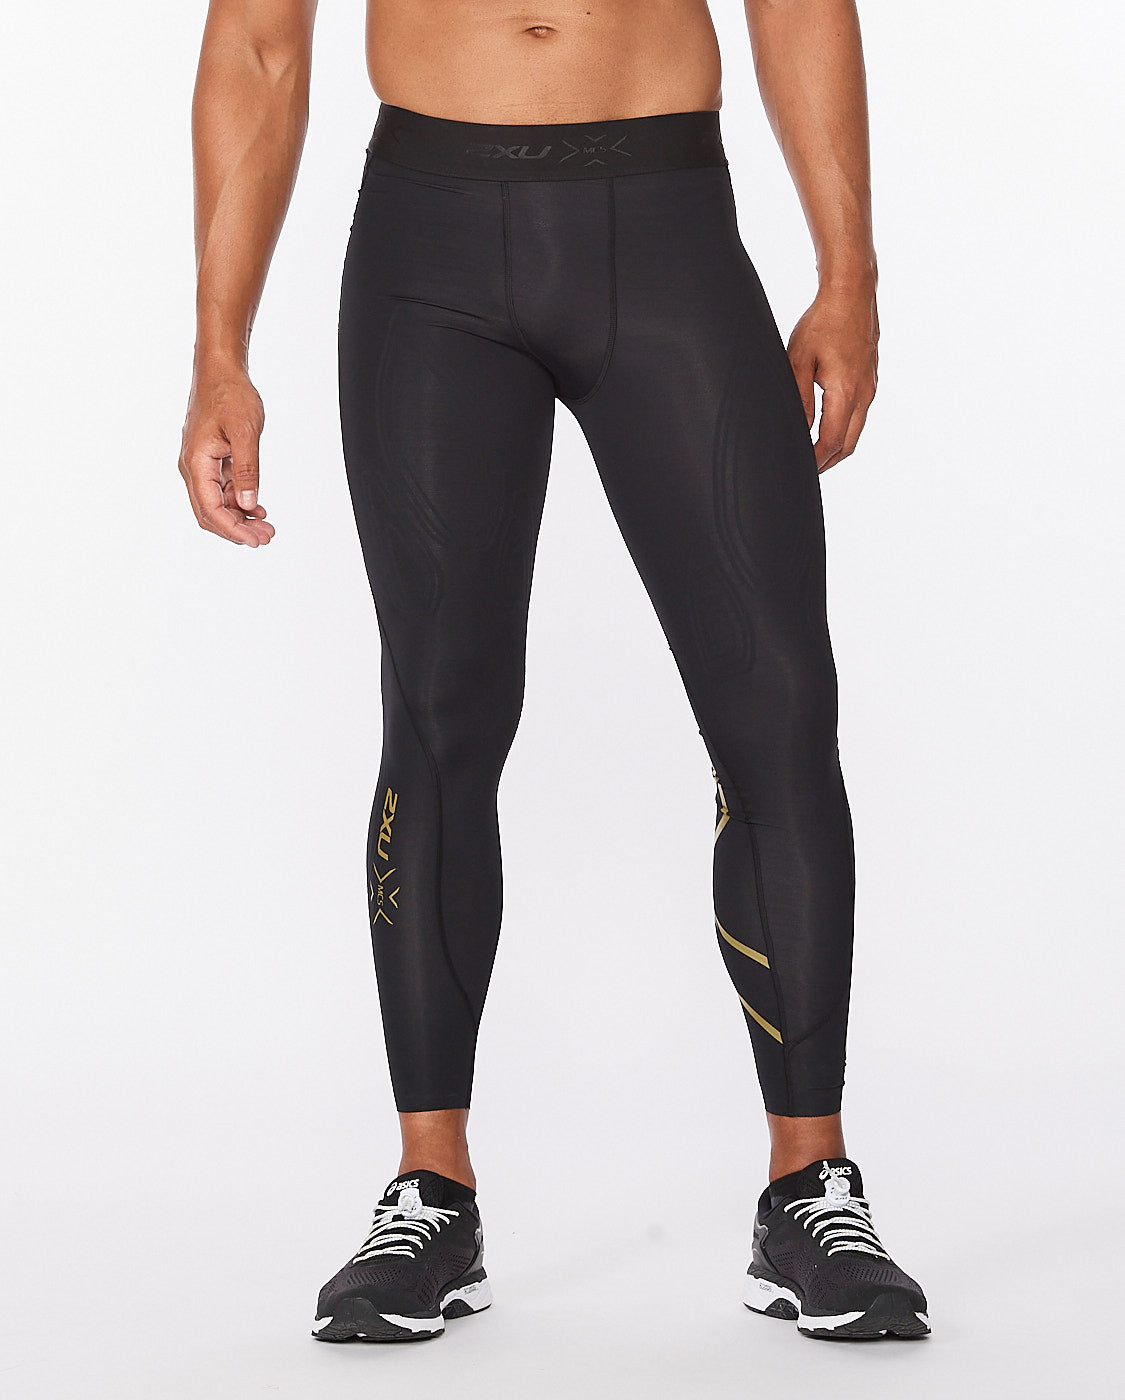 2XU Men's Force Compression Shorts - Performance Activewear for Men,  Compression Shorts for Enhanced Support and Recovery - Black/Gold - Size  XX-Large